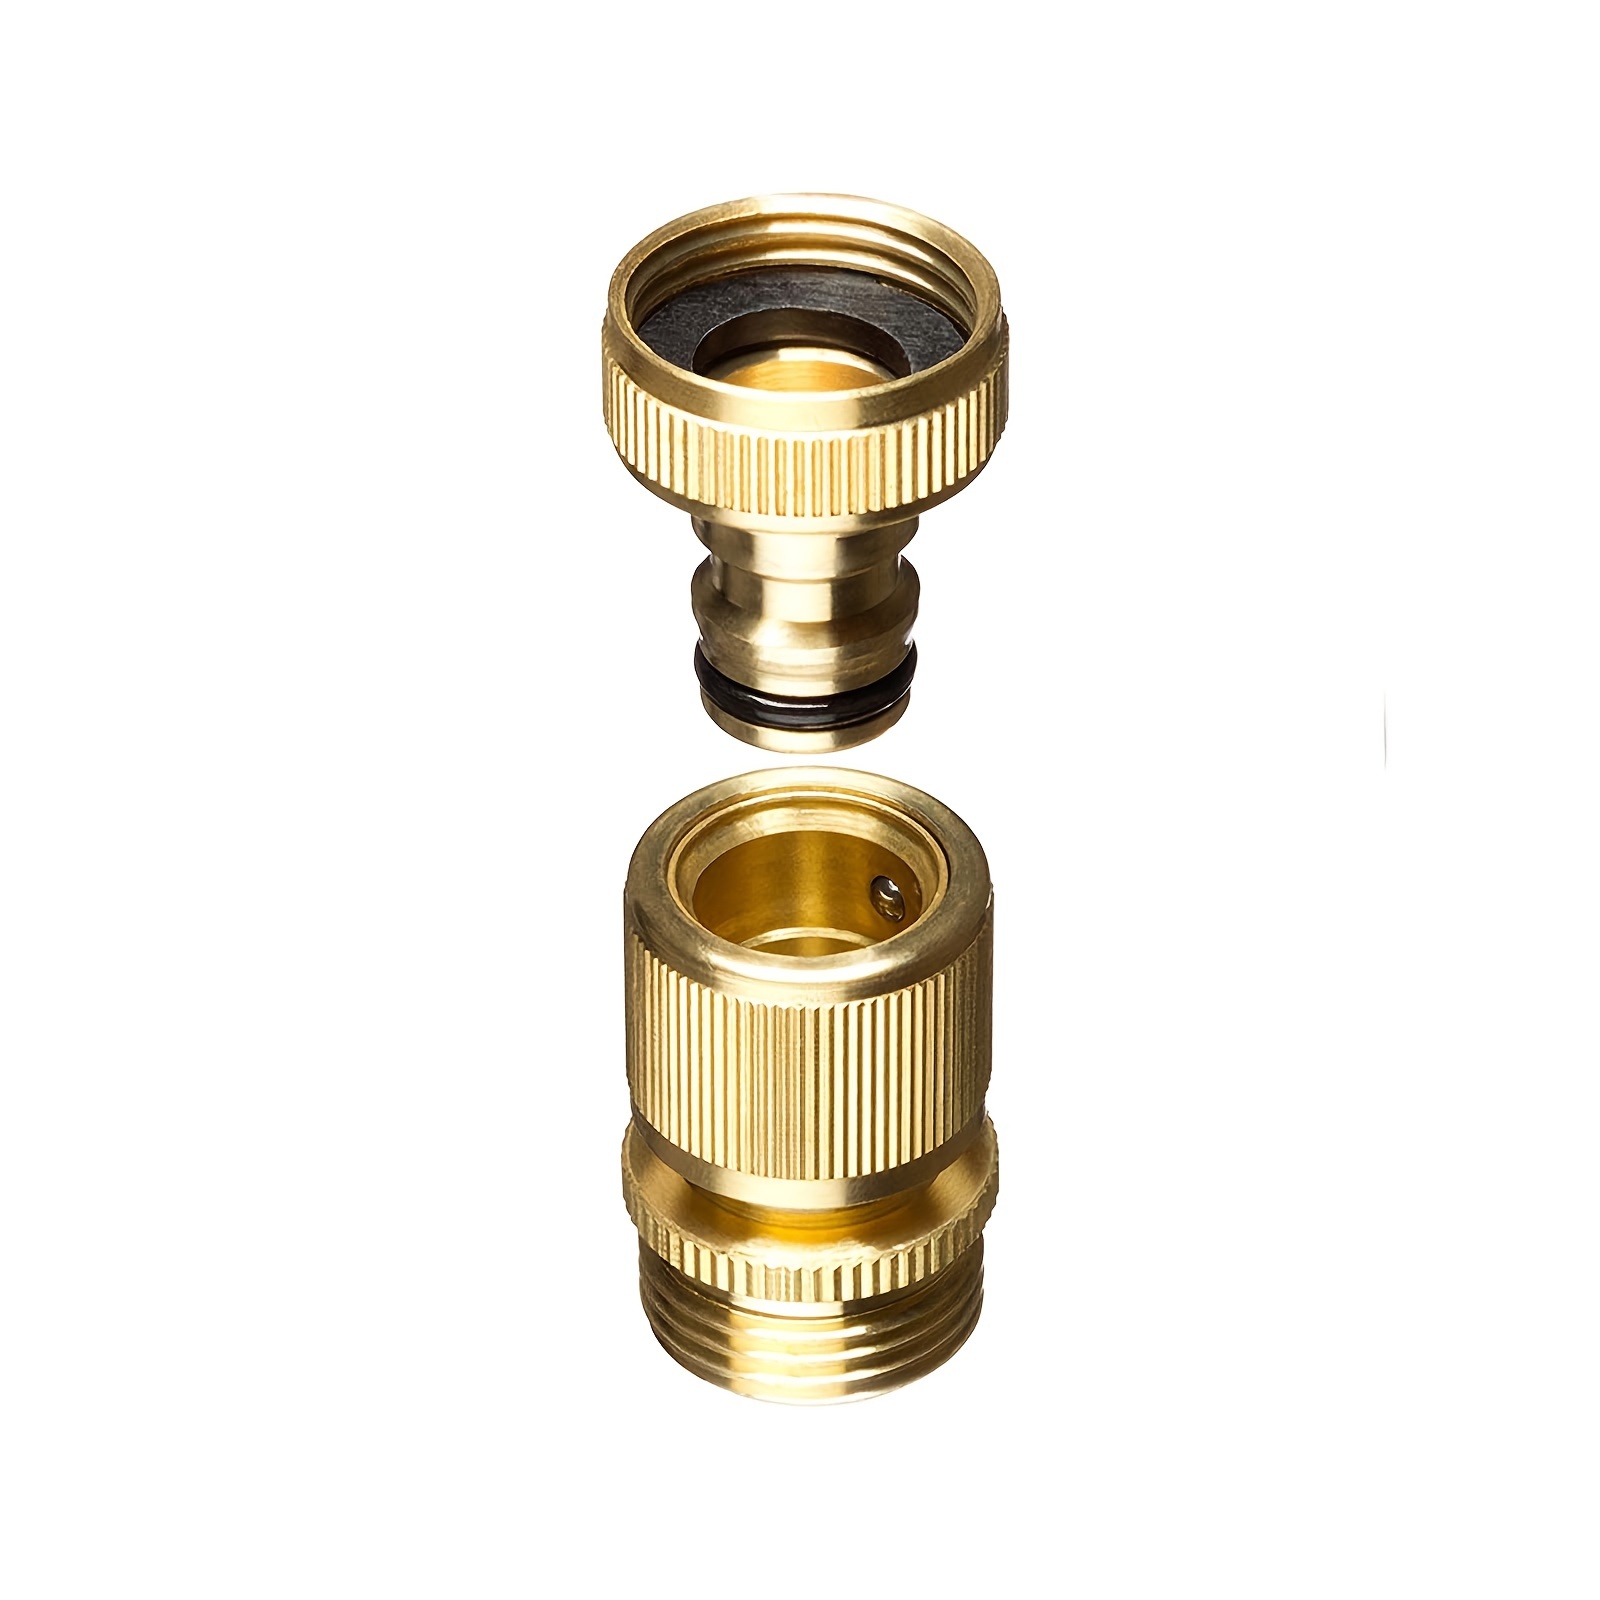 1 Pair Brass Hose Quick Connect 3/4 Inches GHT Thread Garden Fittings Male & Female